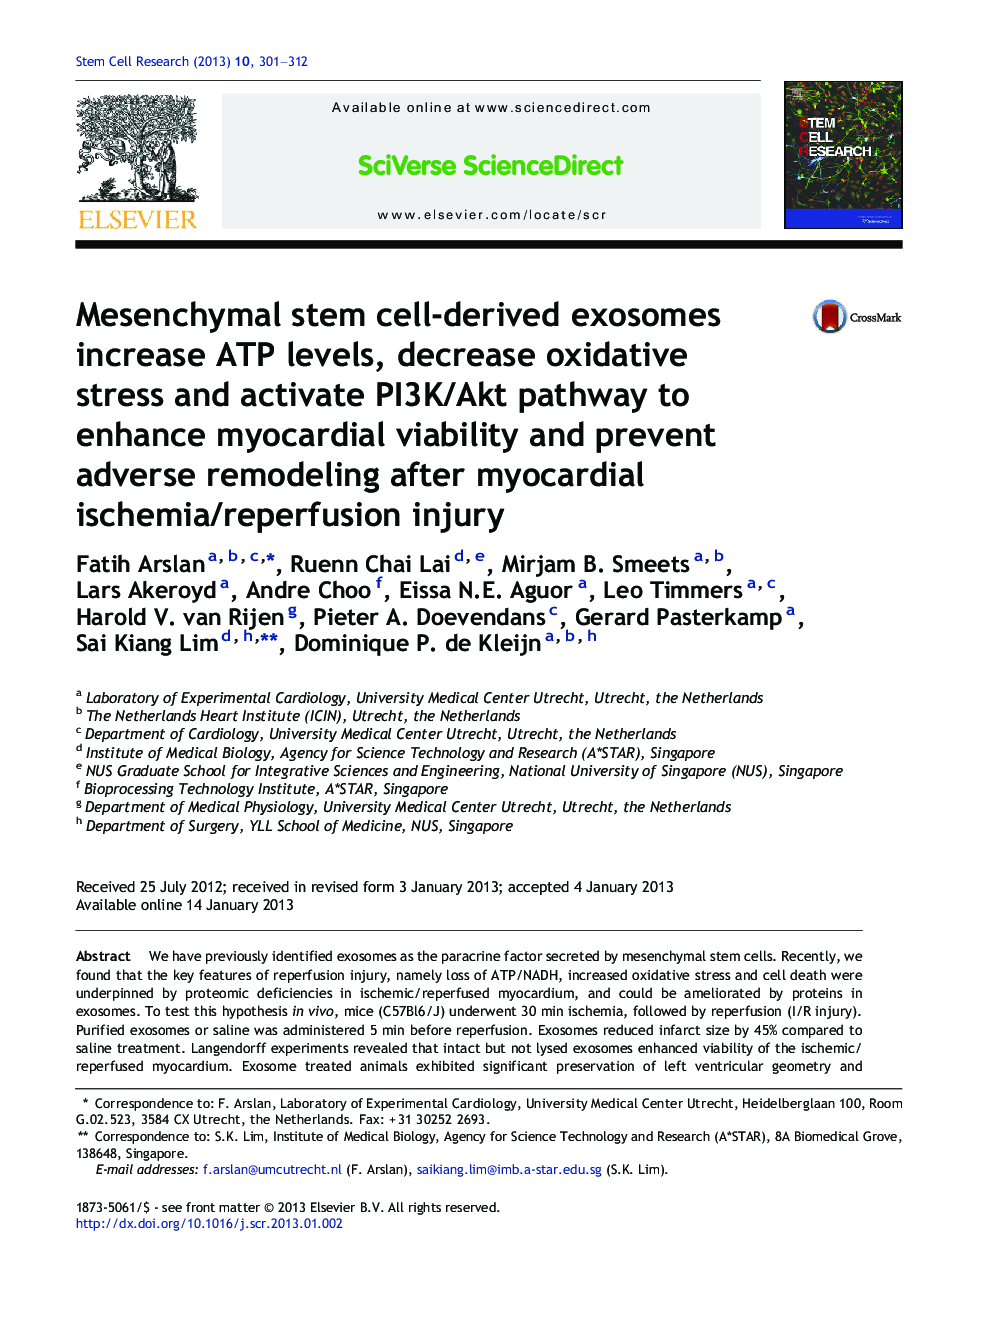 Mesenchymal stem cell-derived exosomes increase ATP levels, decrease oxidative stress and activate PI3K/Akt pathway to enhance myocardial viability and prevent adverse remodeling after myocardial ischemia/reperfusion injury